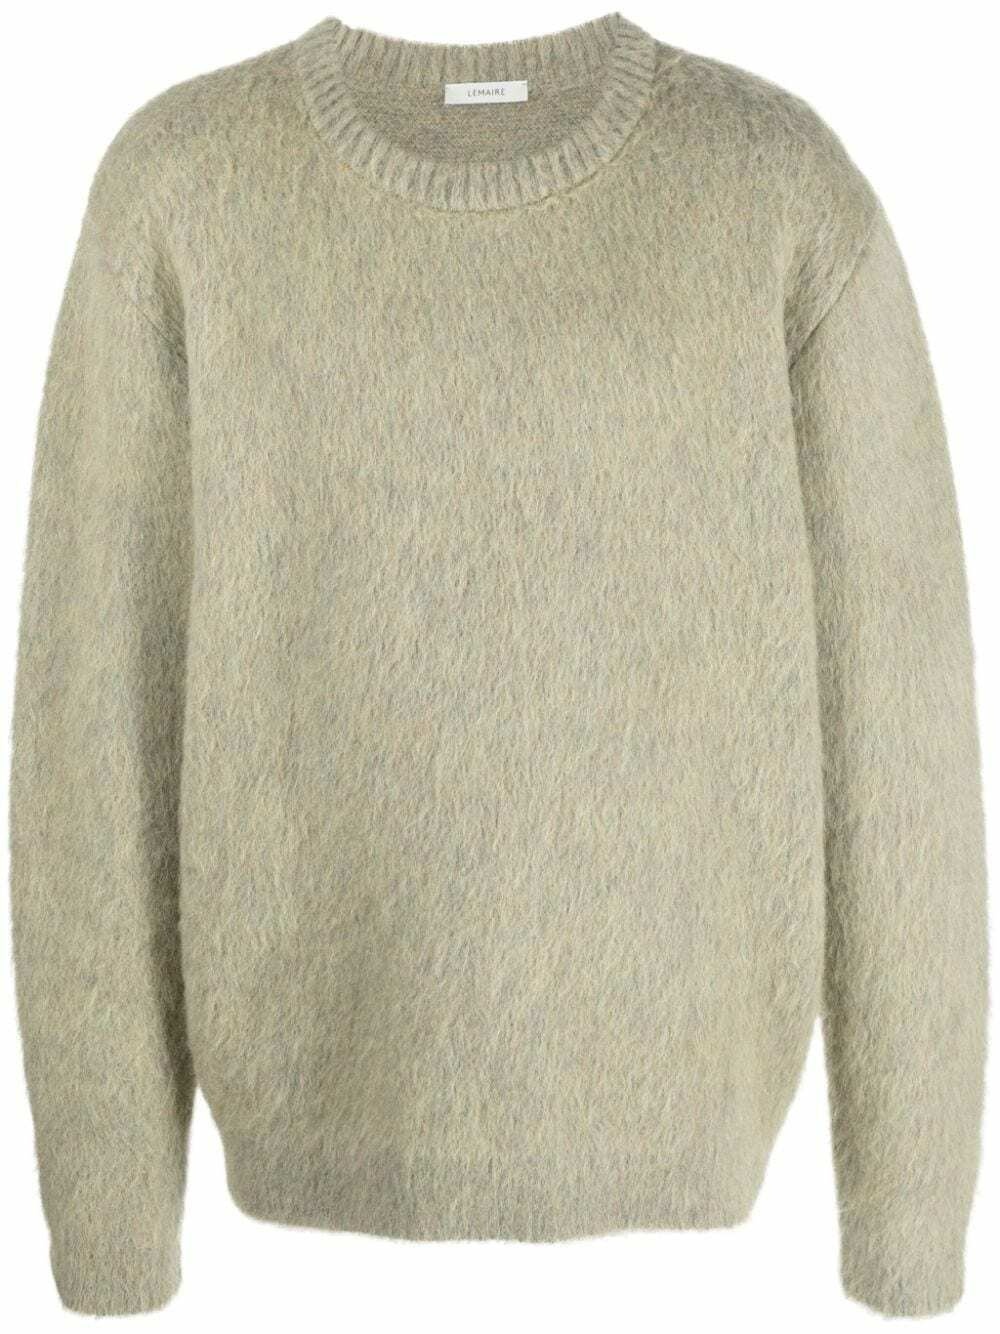 Photo: LEMAIRE - Wool Crewneck Sweater